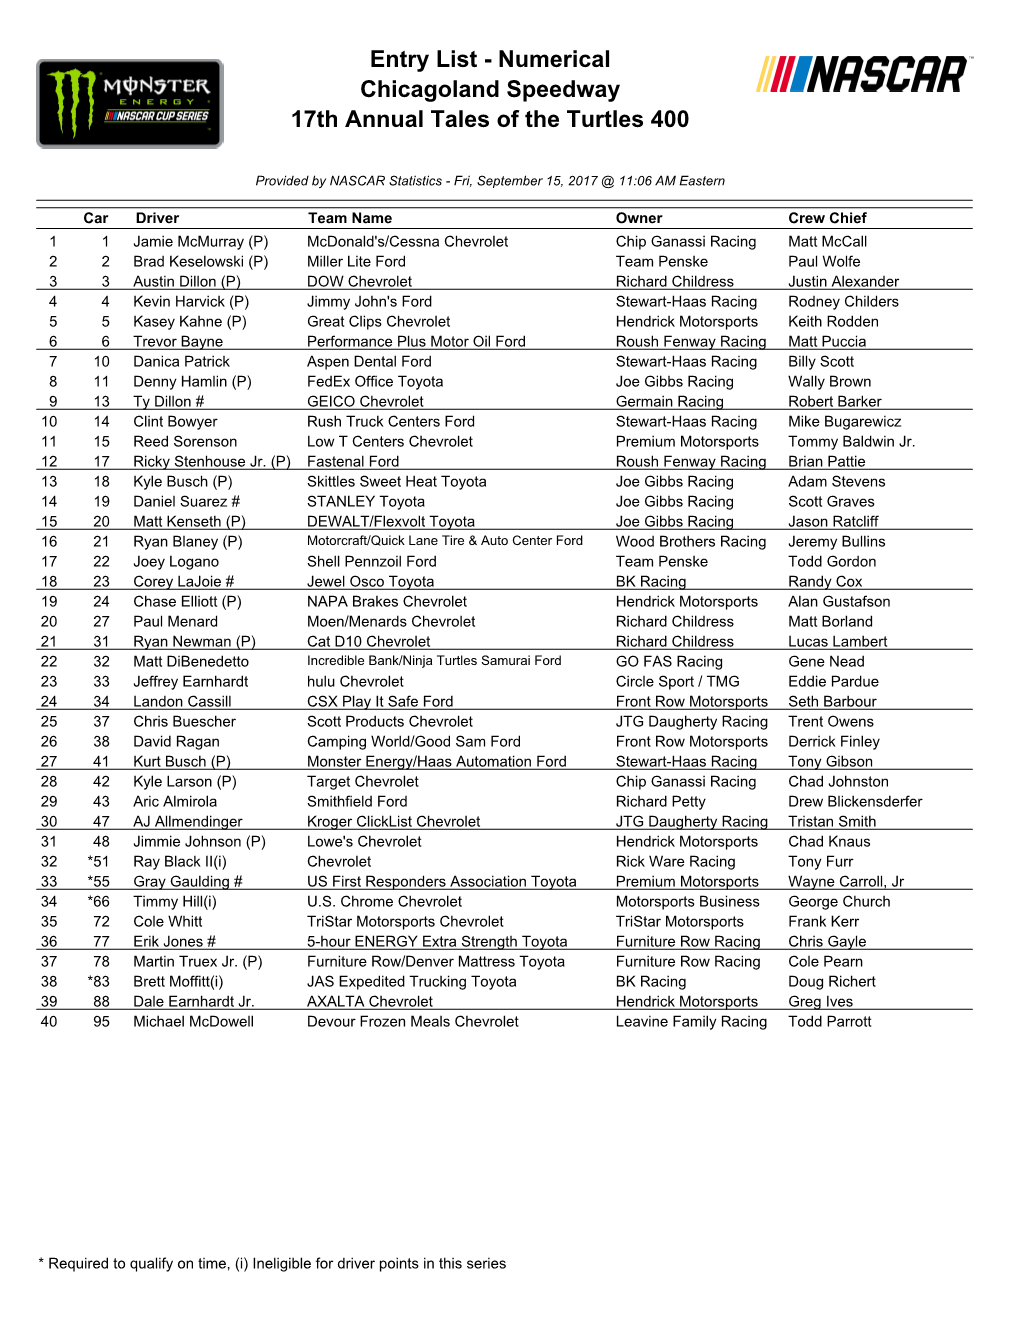 Entry List - Numerical Chicagoland Speedway 17Th Annual Tales of the Turtles 400